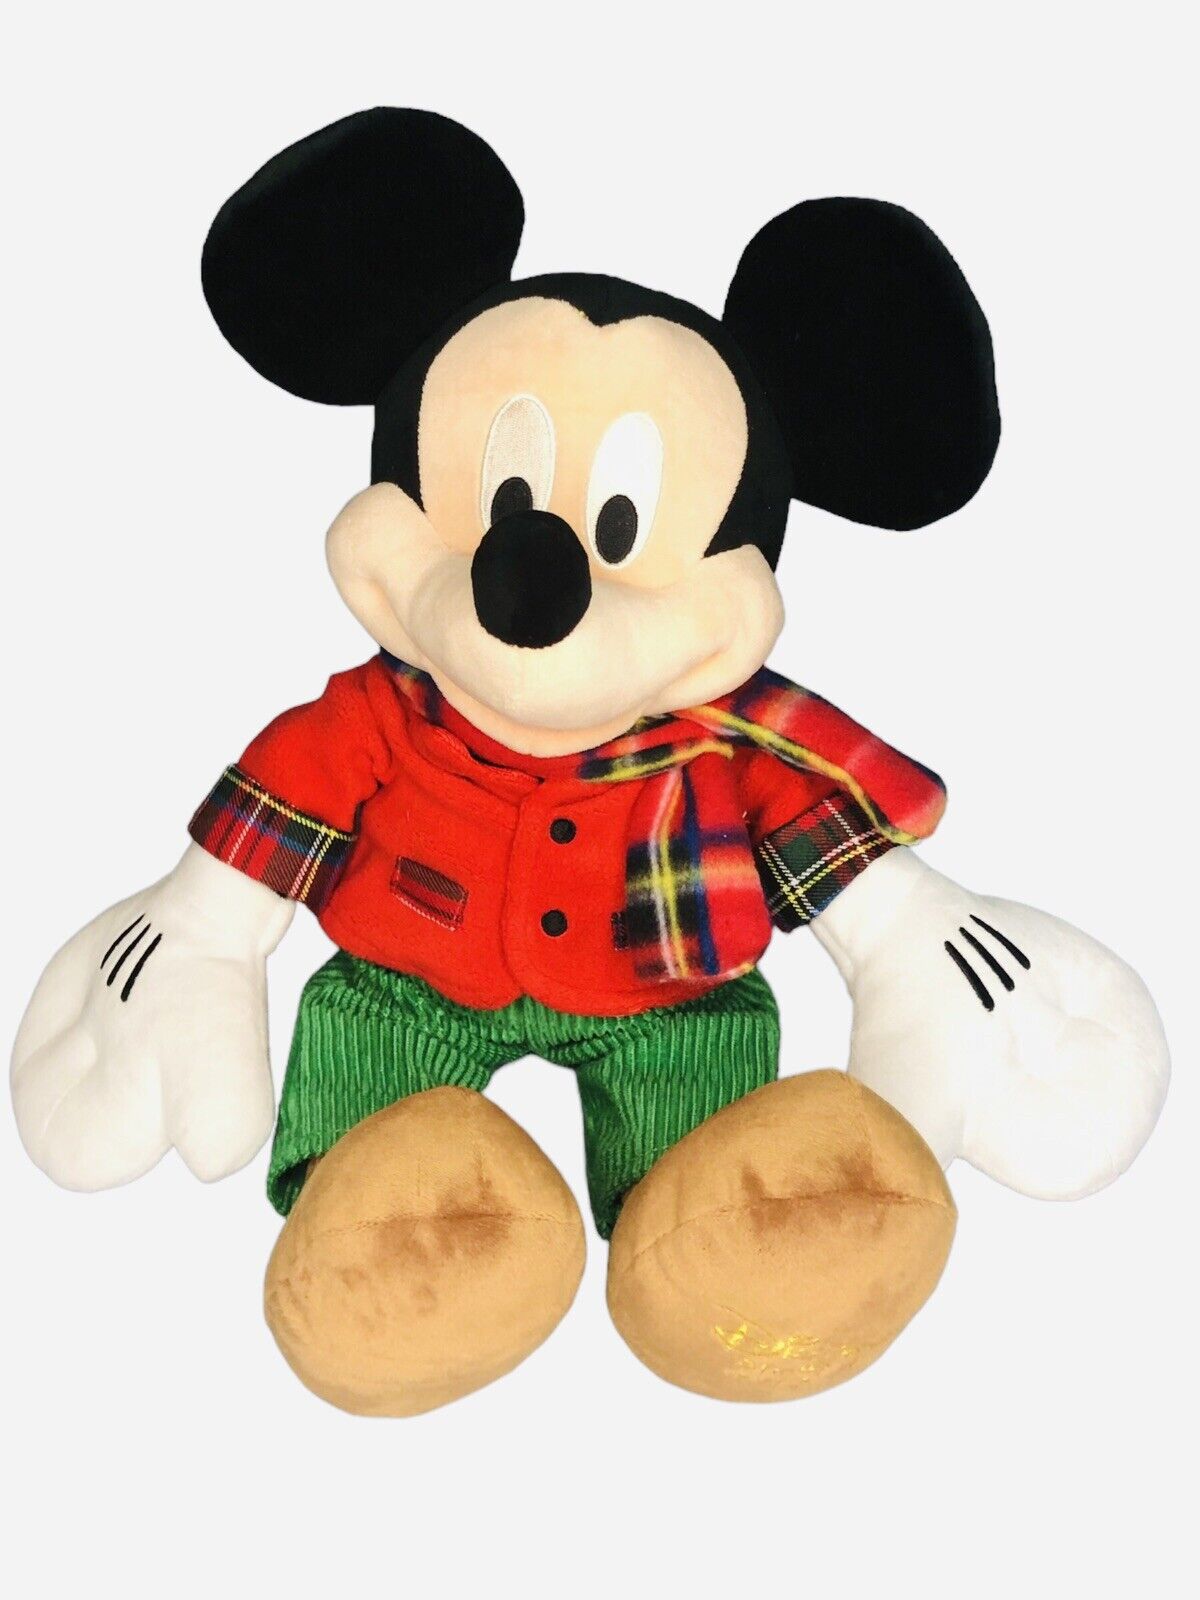 Exclusive Mickey Mouse Collectible Holiday Plush Doll 2012 Walt Disney World UK